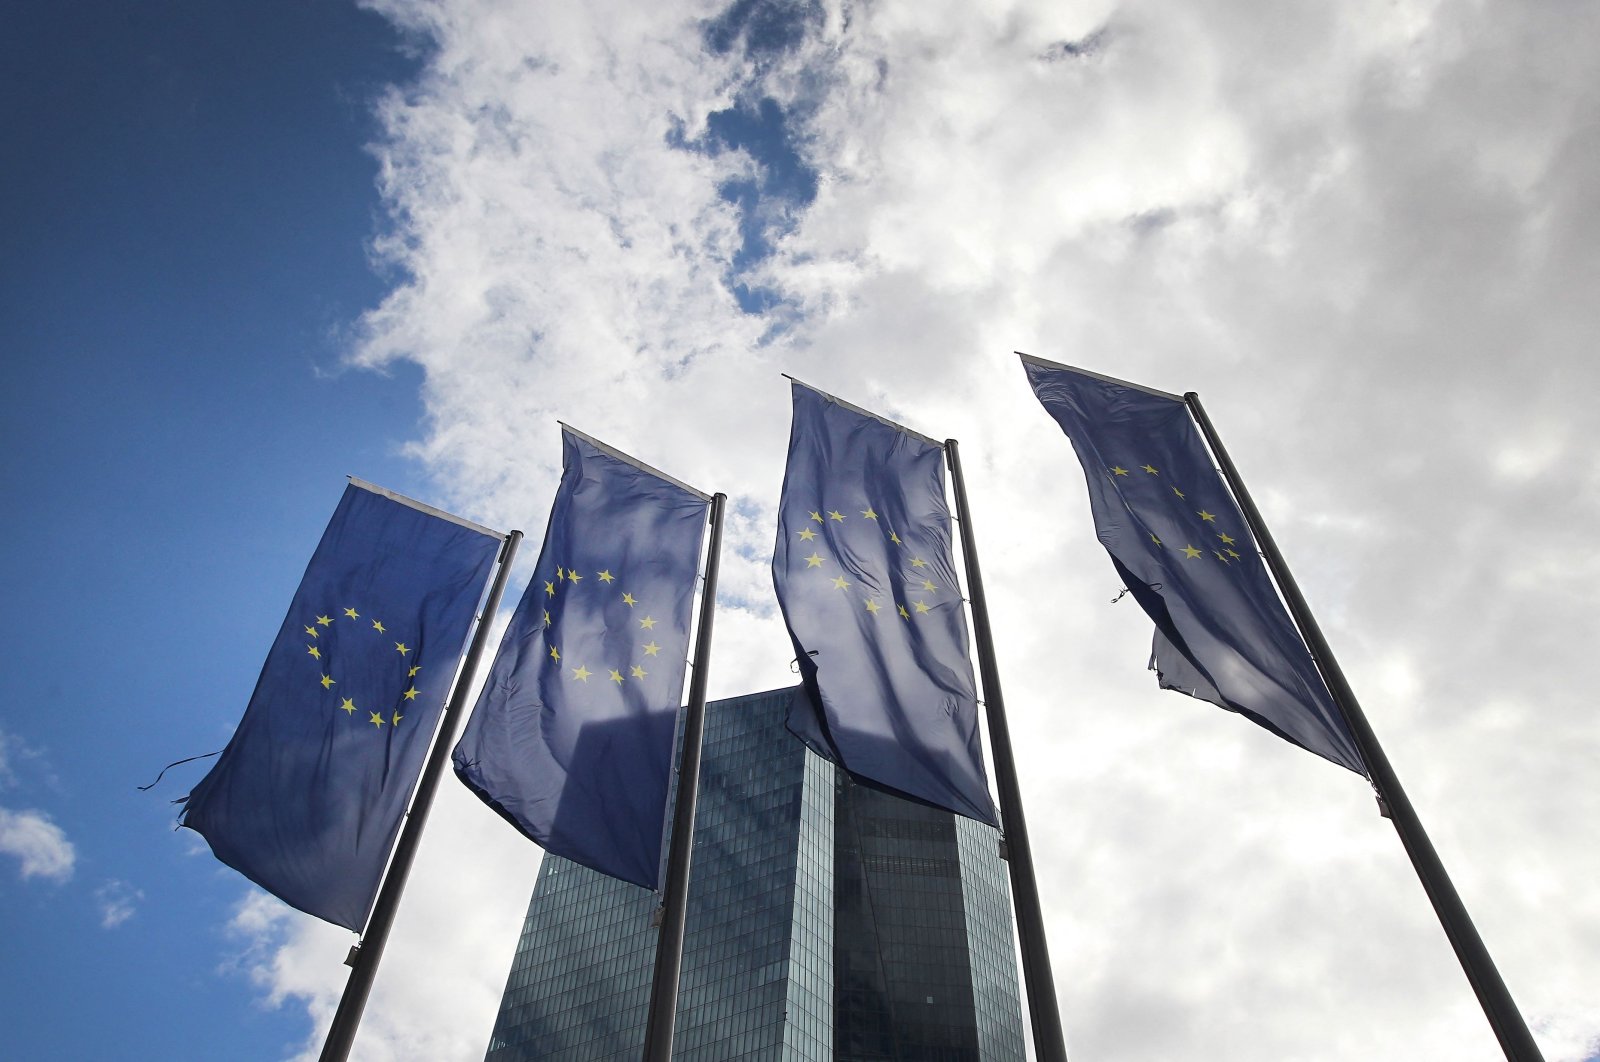 The flags of the European Union flutter in front of the headquarters of the European Central Bank (ECB) in Frankfurt am Main, Germany, Sept. 8, 2022. (AFP Photo)